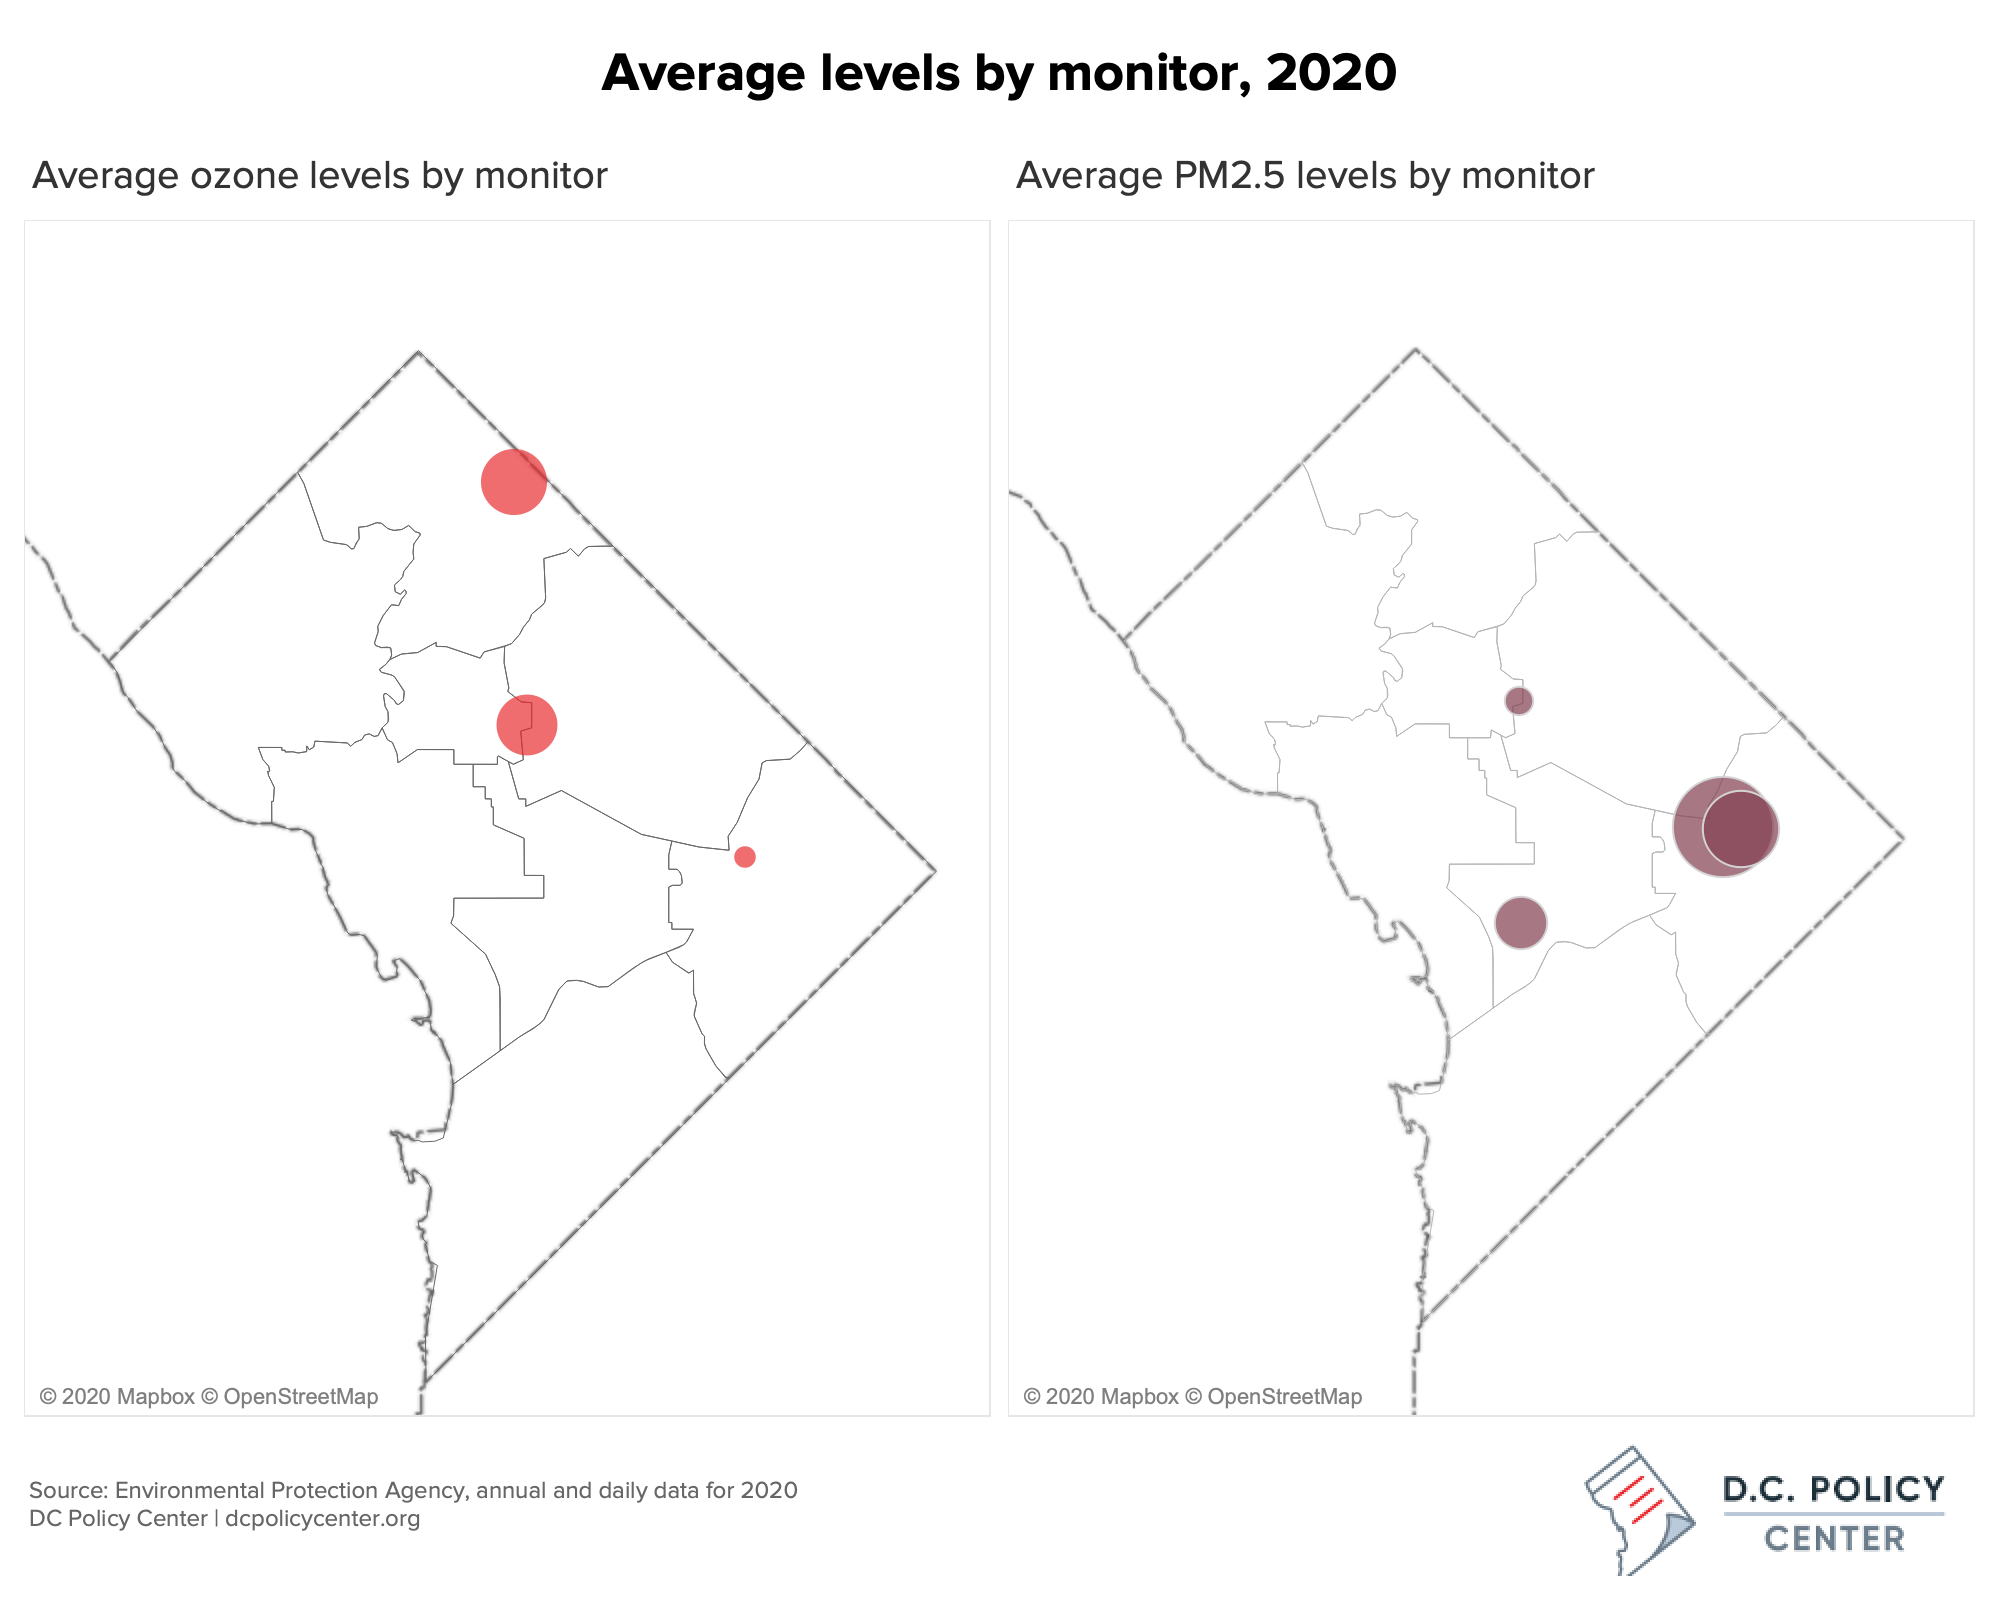 map of 2020 ozone and PM2.5 levels in D.C., showing higher PM2.5 levels in Ward 7